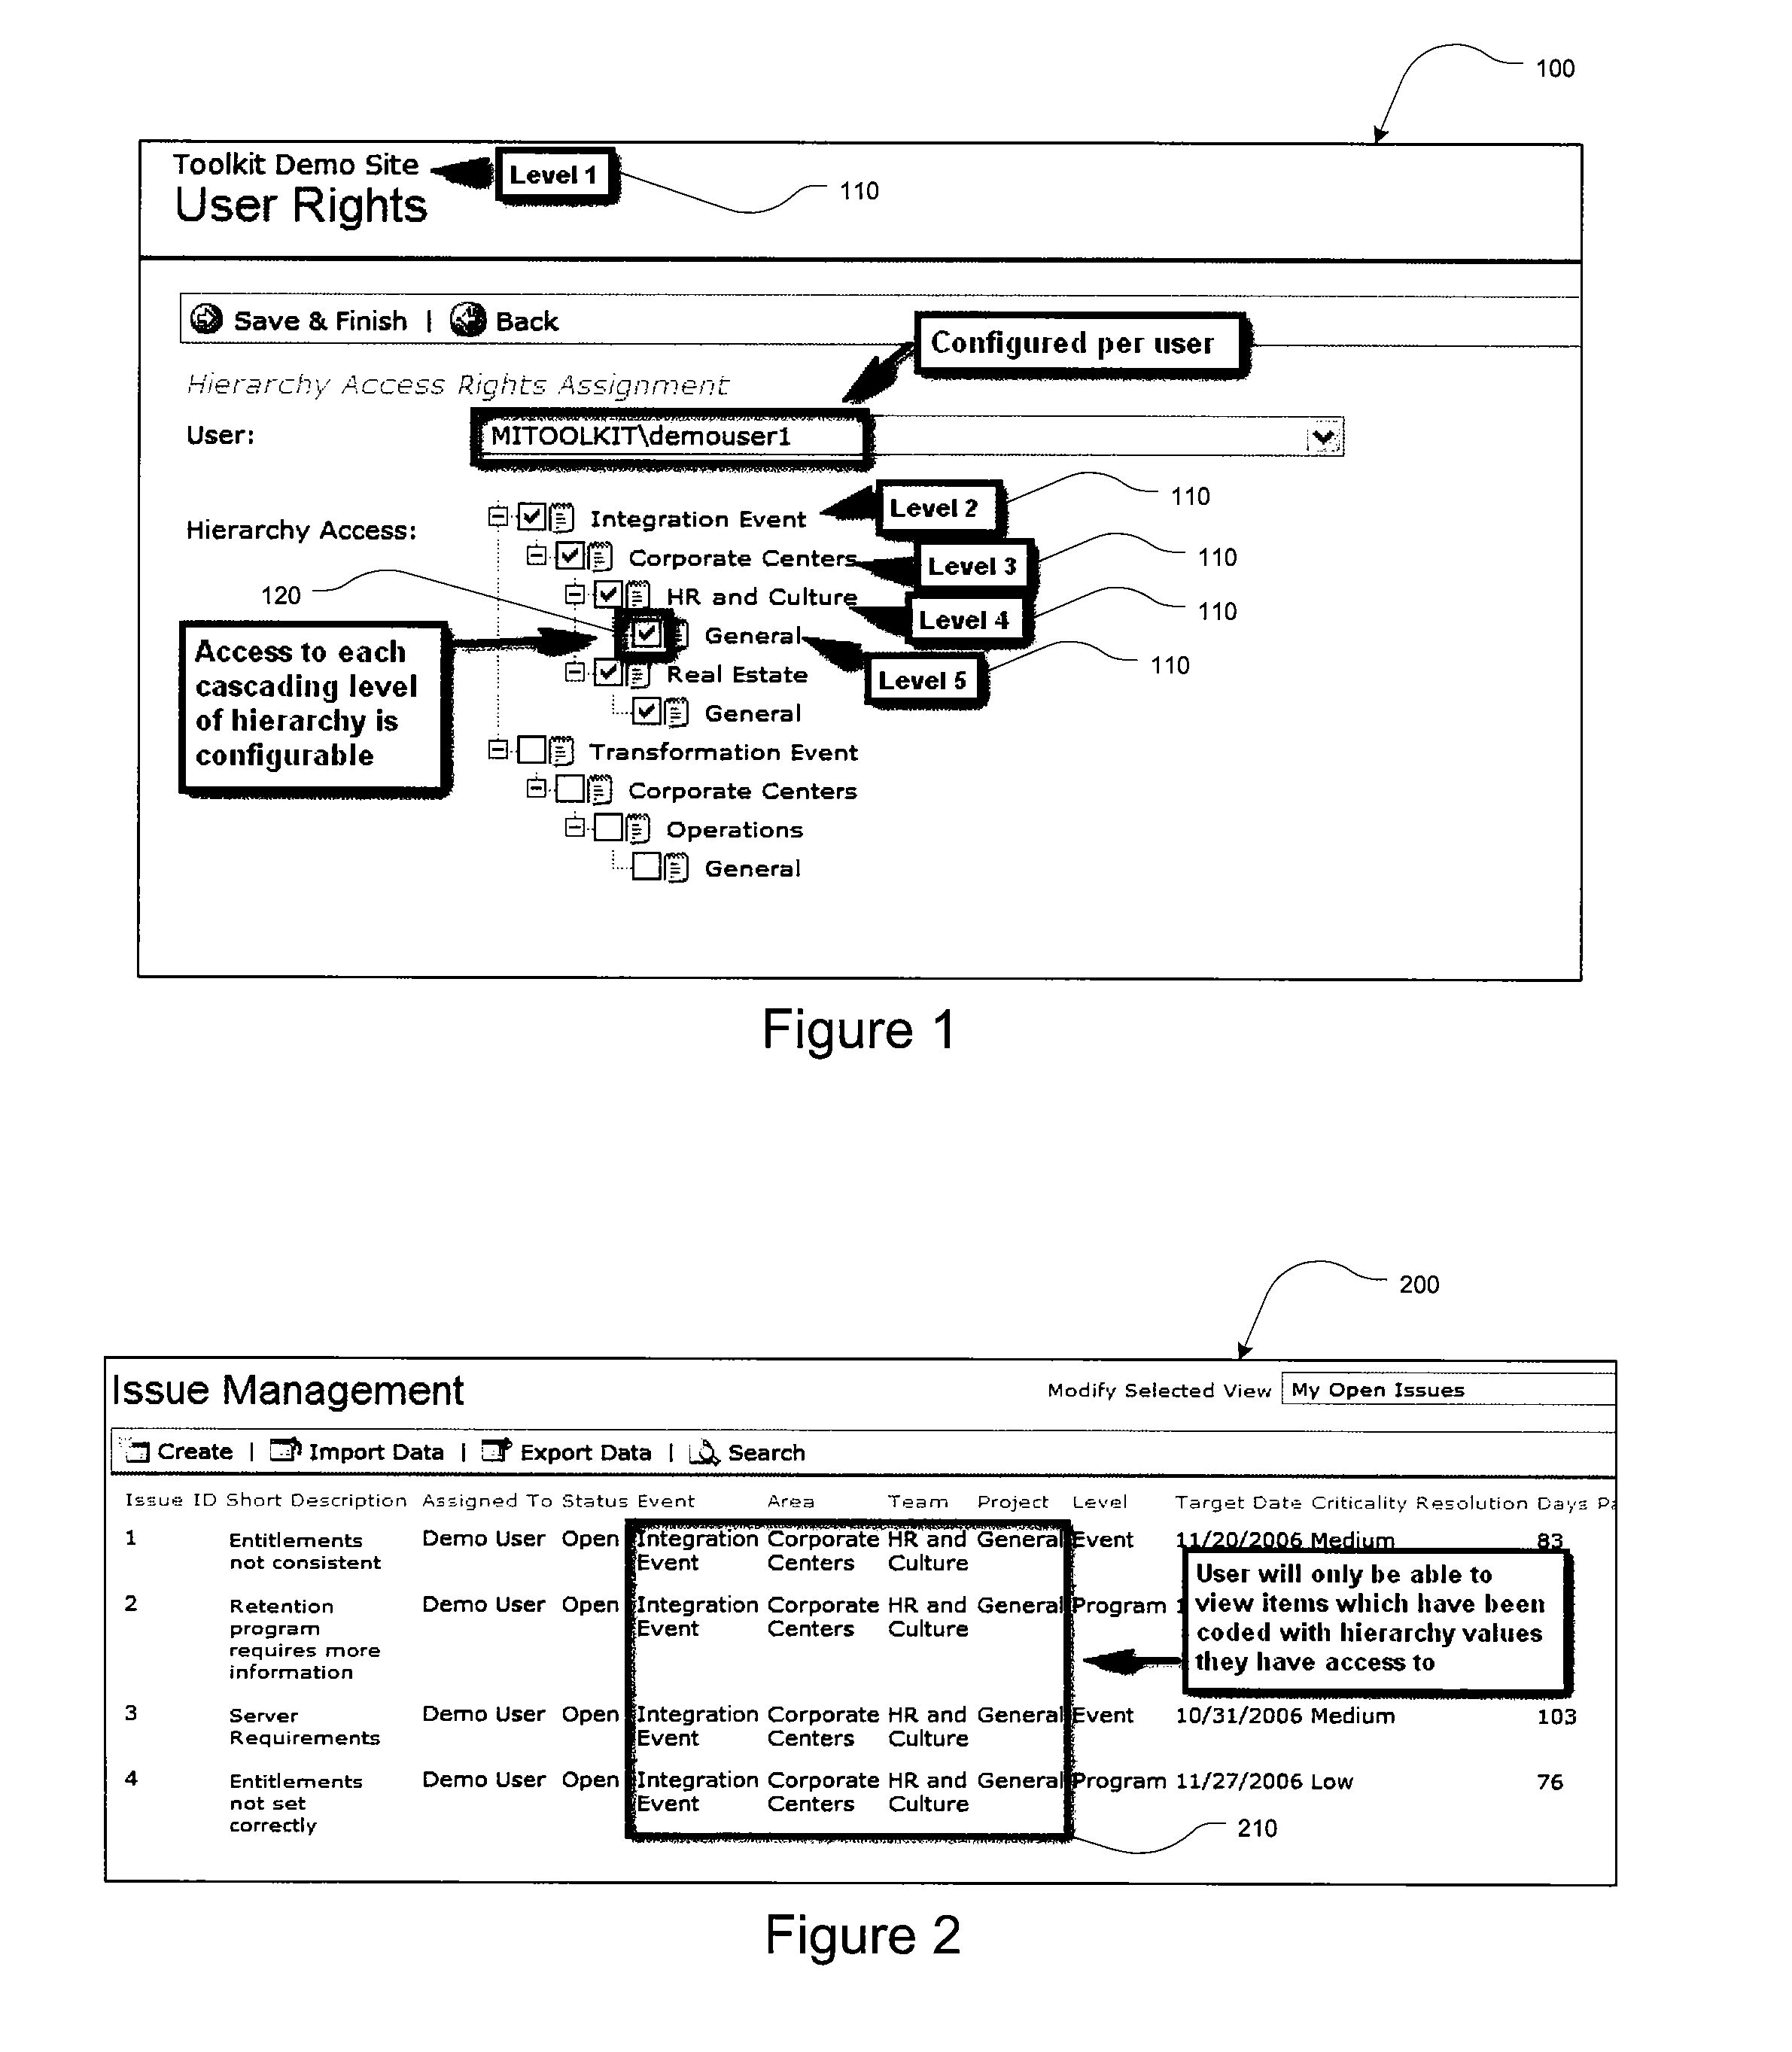 Merger integration toolkit system and method for milestone tracking